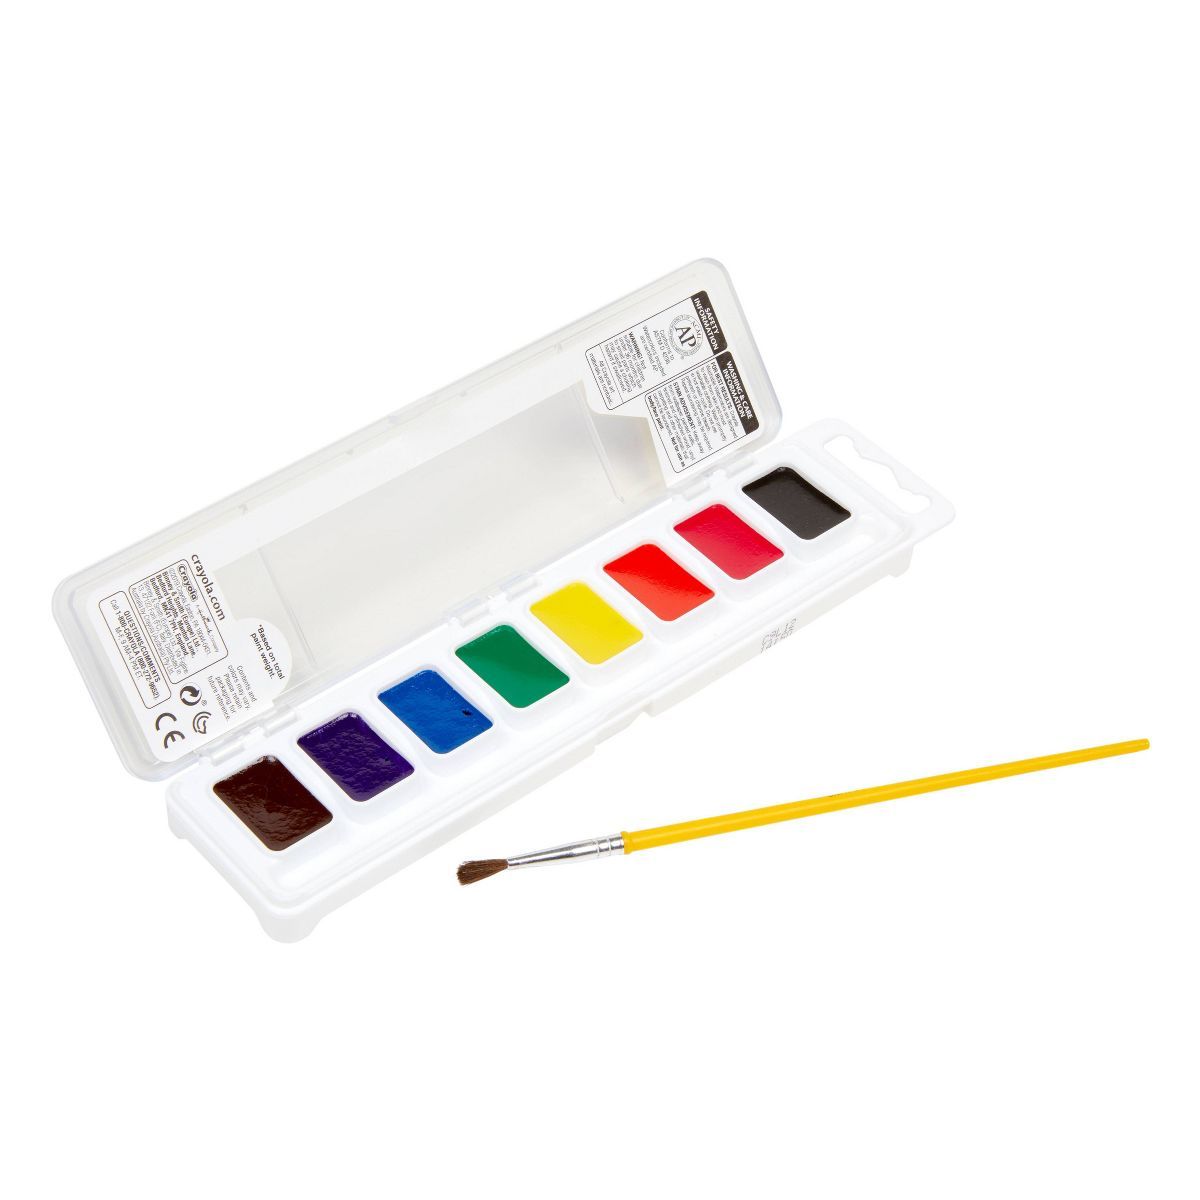 Crayola 8ct Kids Watercolor Paints with Brush | Target